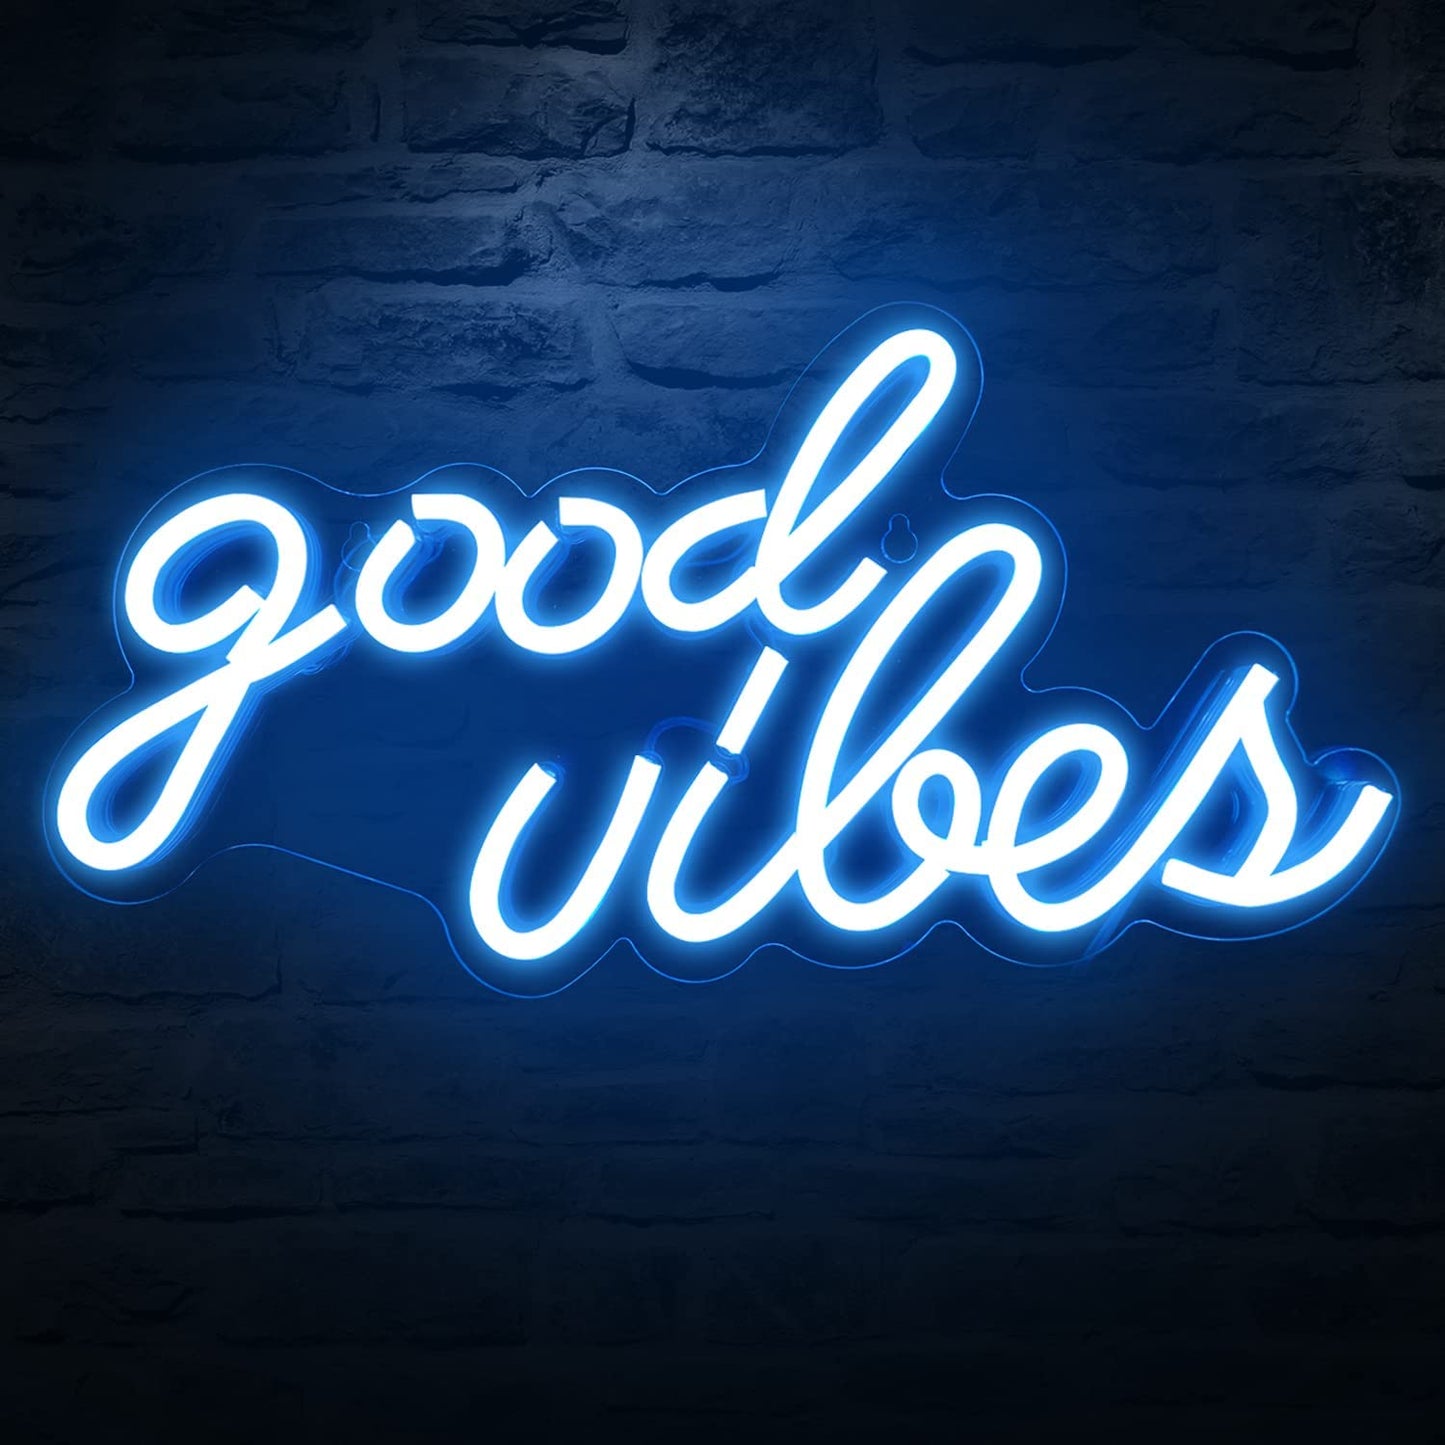 Good Vibes Neon SignHome Harmony EssentialsHome Harmony EssentialsHome Decor
✔️Light up your home: LED Neon signs for bedroom wall decor are bright. It energizes the mood, enhances the vibe, and electrifies a space with its warm, inviting glGood Vibes Neon Sign for Bedroom Wall Decor Powered by USB Neon Light,